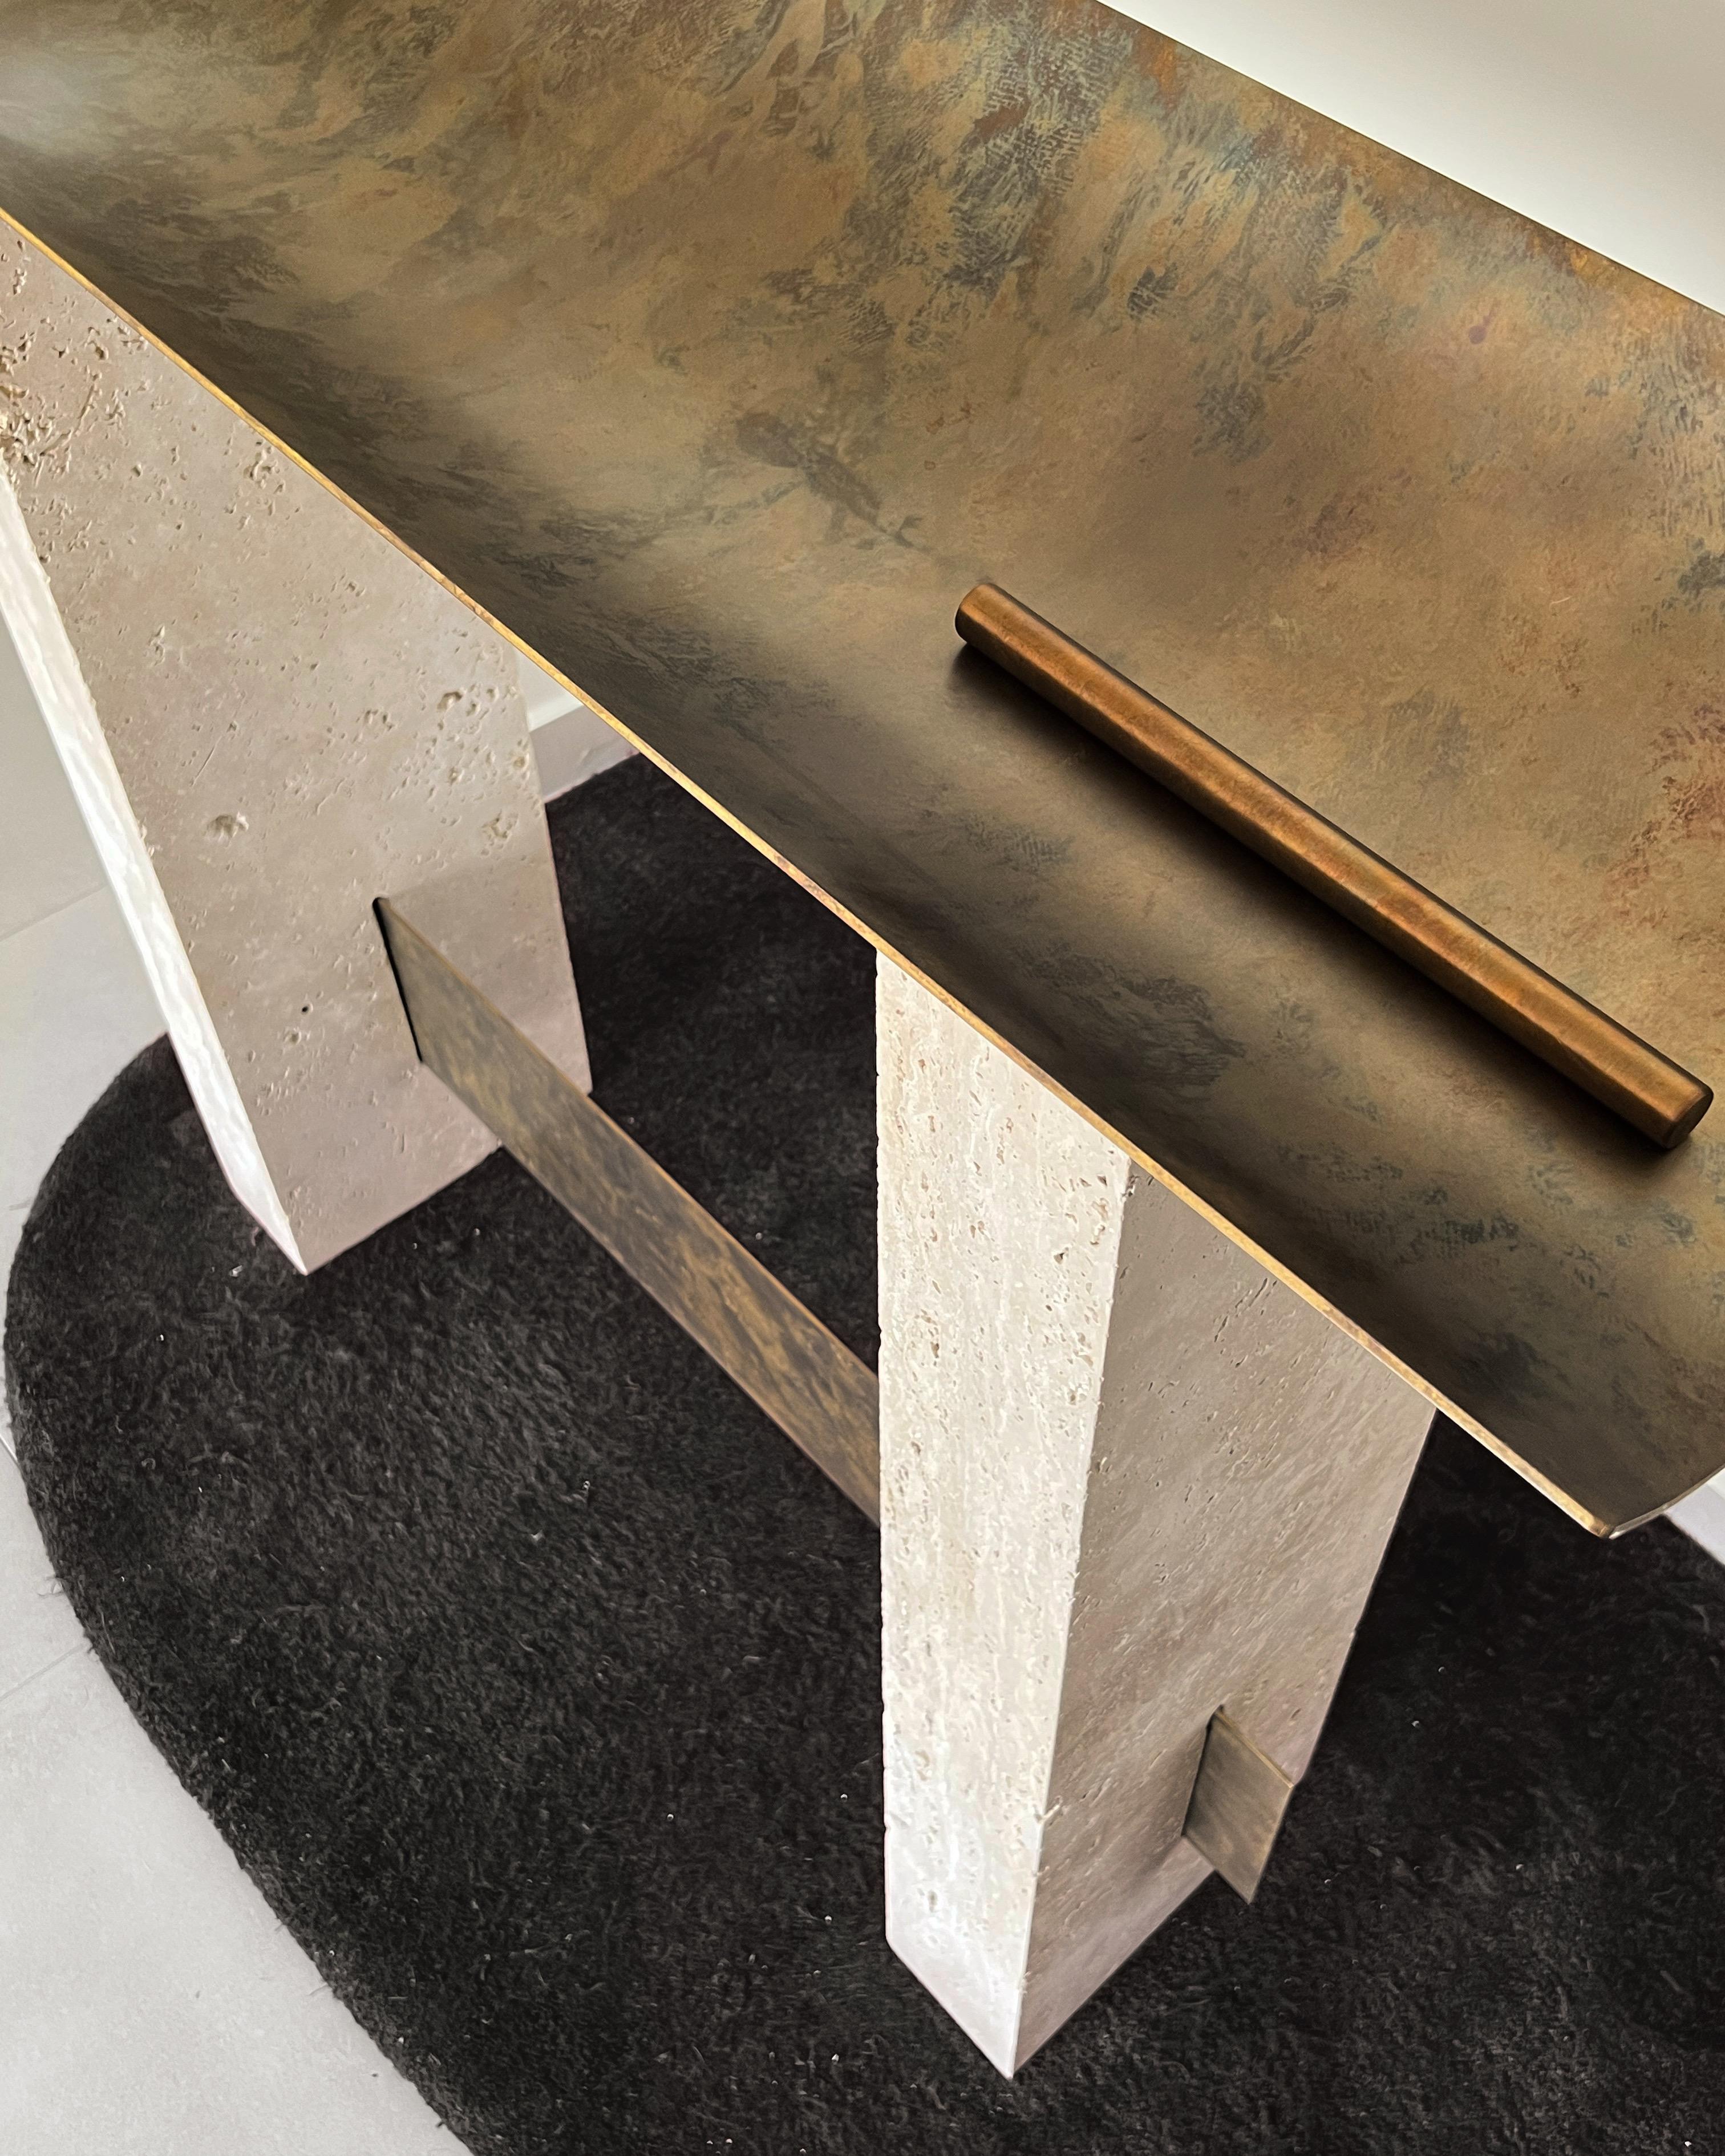 Turkish Modern, 21st Century, Patinated, Brass, Travertine, Signed, Unique, Brut Console For Sale